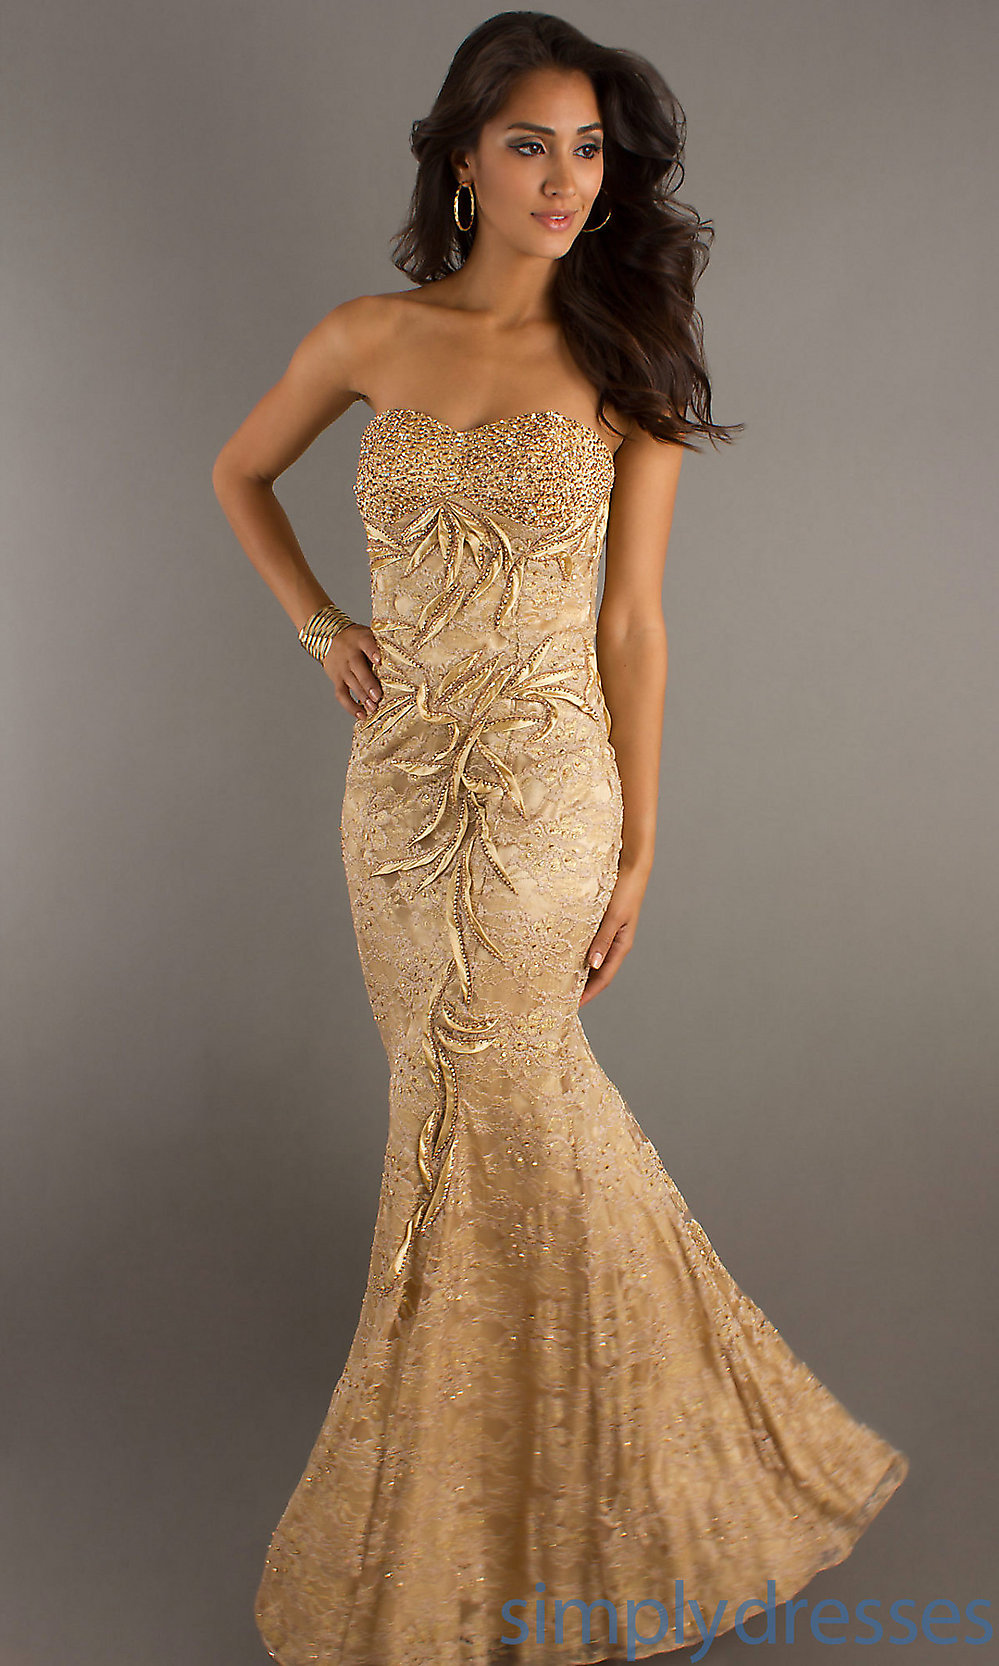 Black And Gold Ball Dress - Beautiful And Elegant